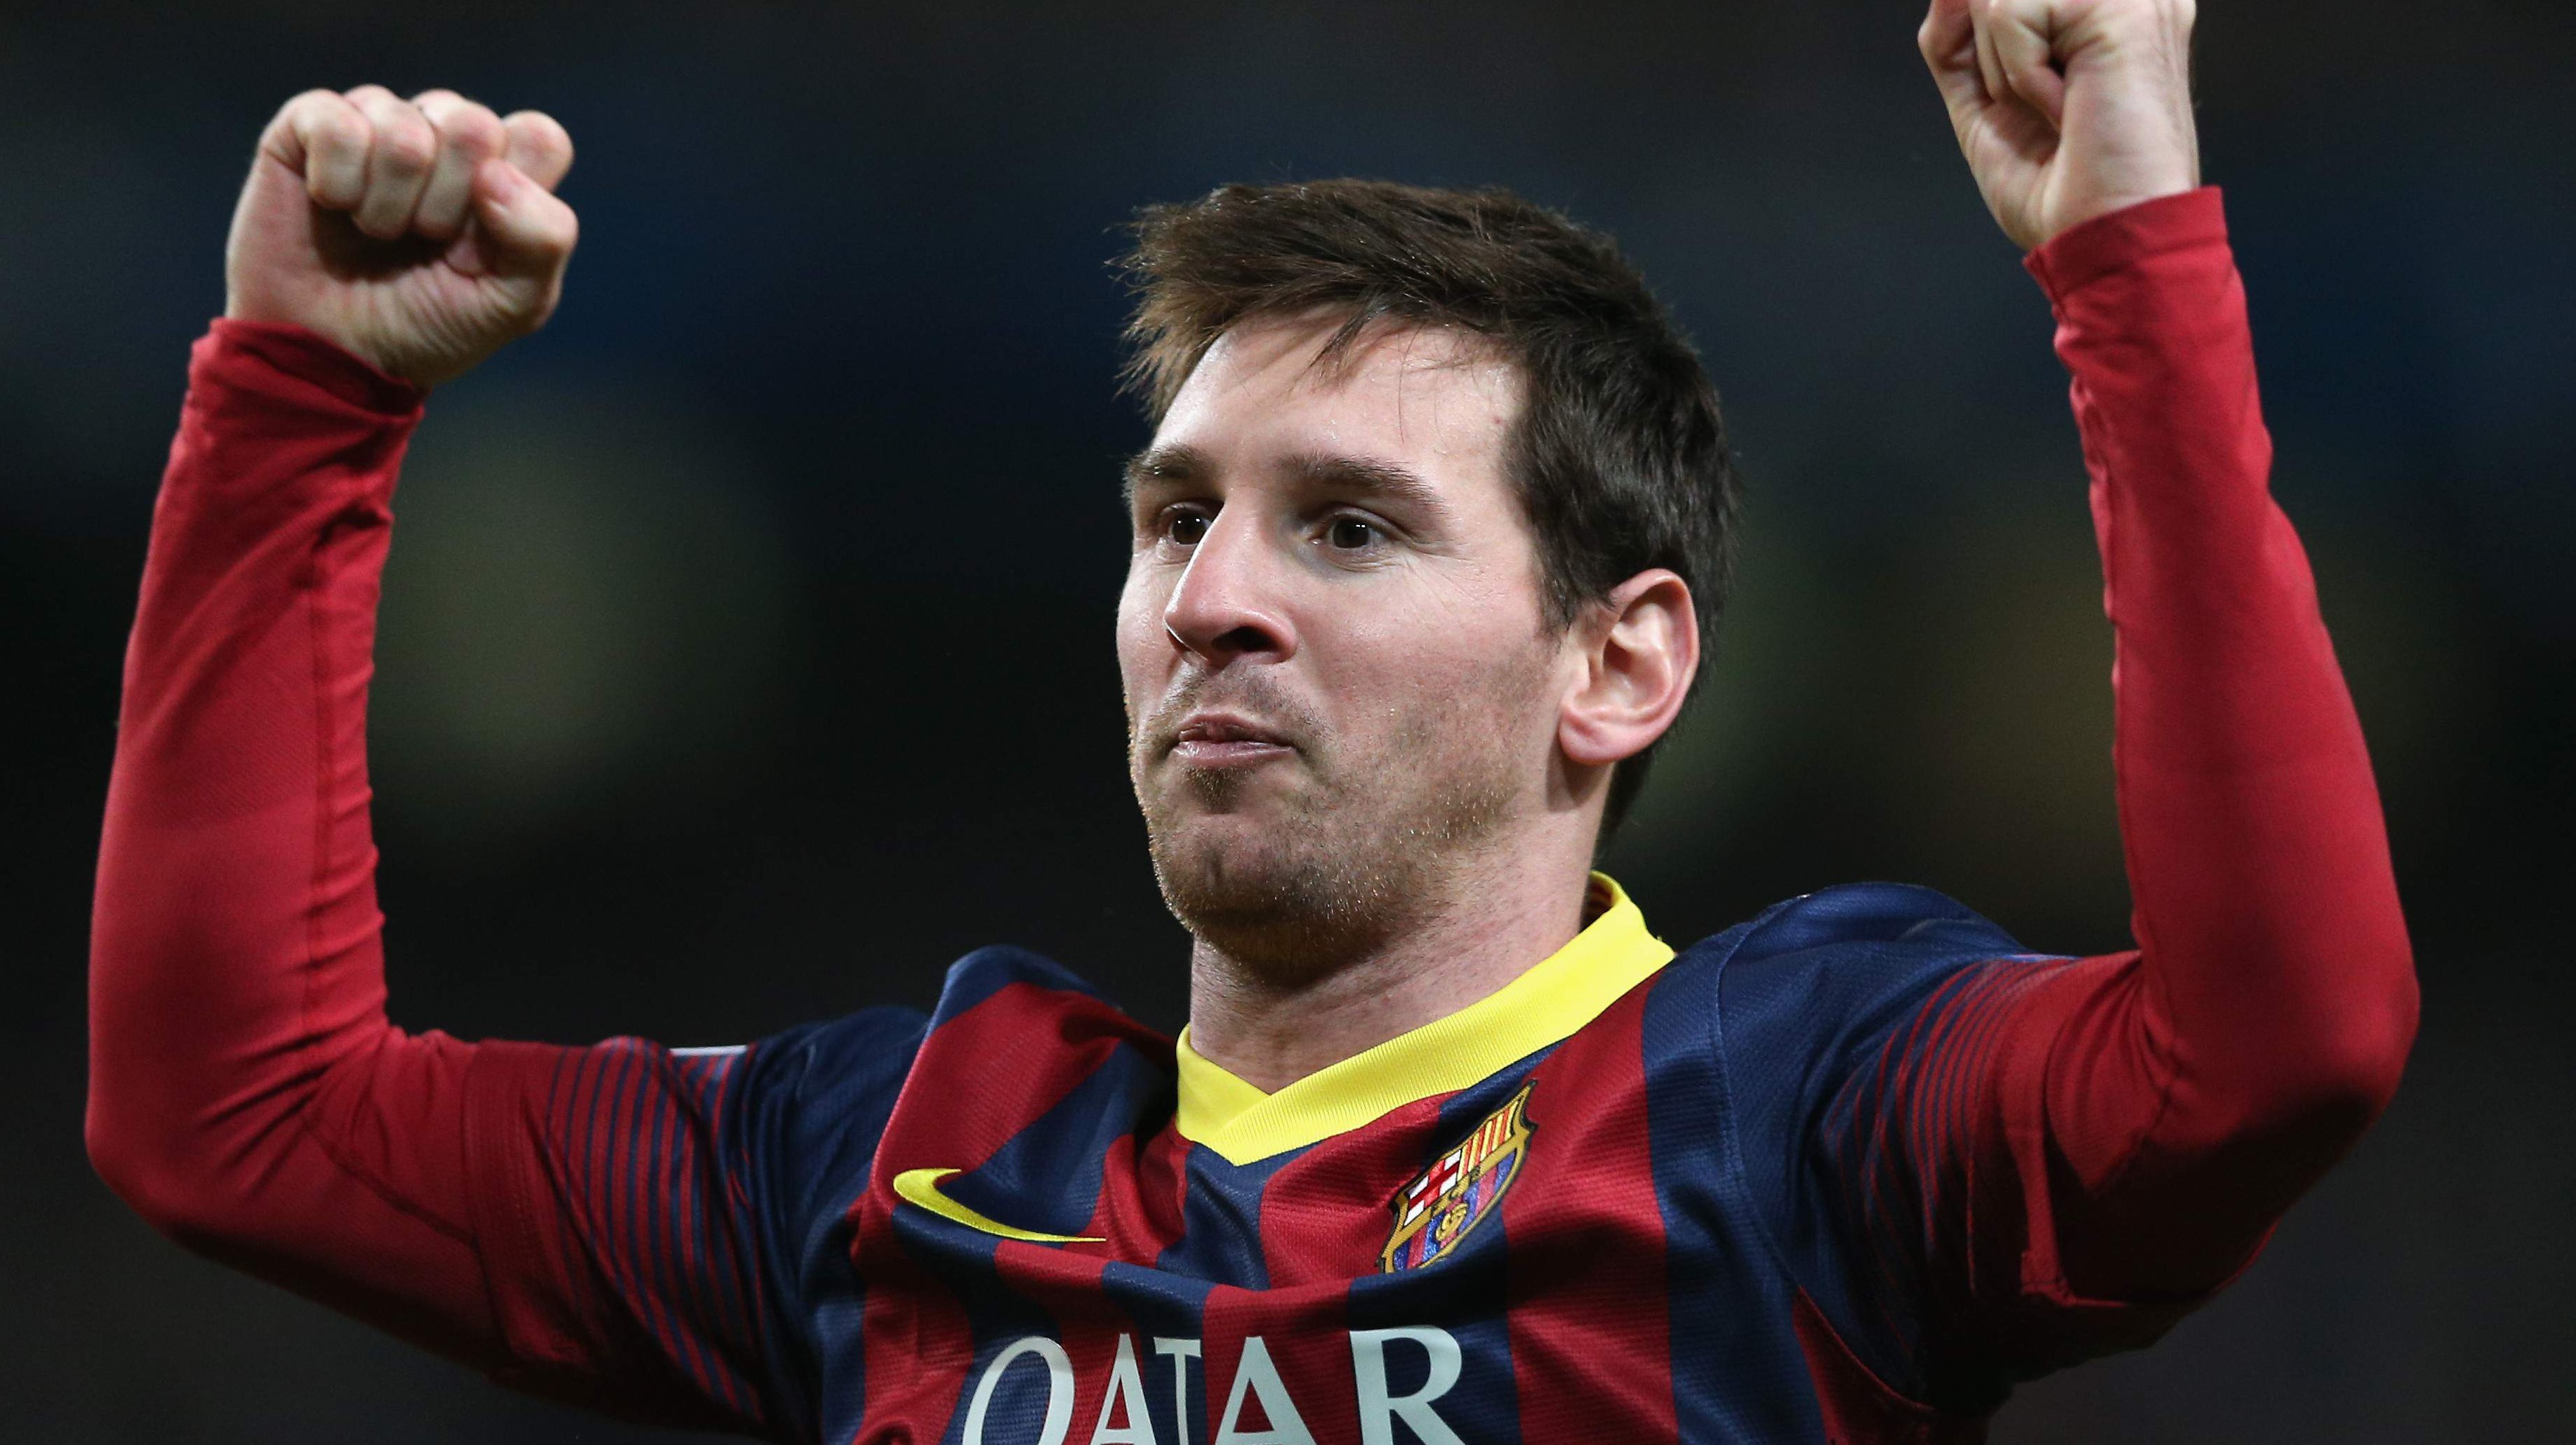 What is Lionel Messi's Net Worth?